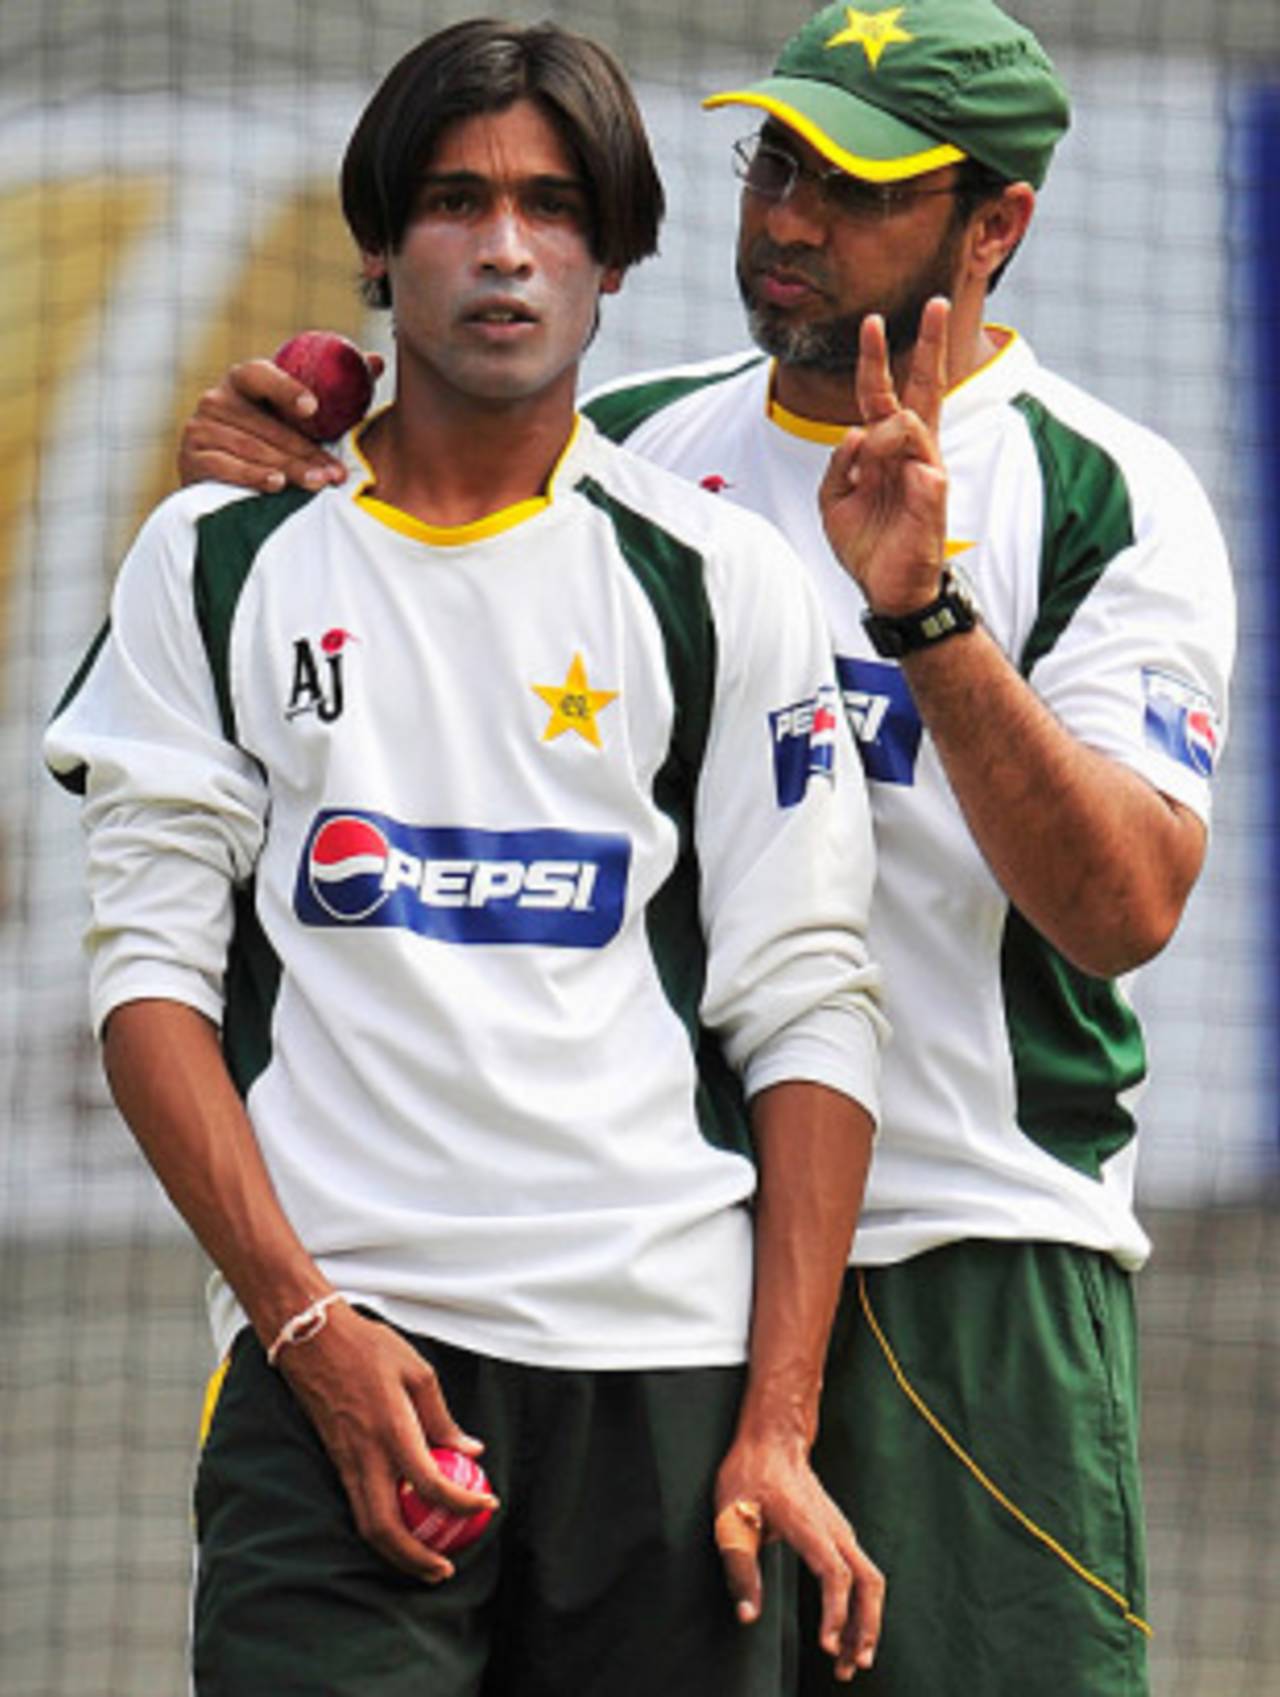 How many fingers, Waqar asks a dazed Mohammad Aamer, who has been told his hair length makes him eligible for sacking&nbsp;&nbsp;&bull;&nbsp;&nbsp;Getty Images